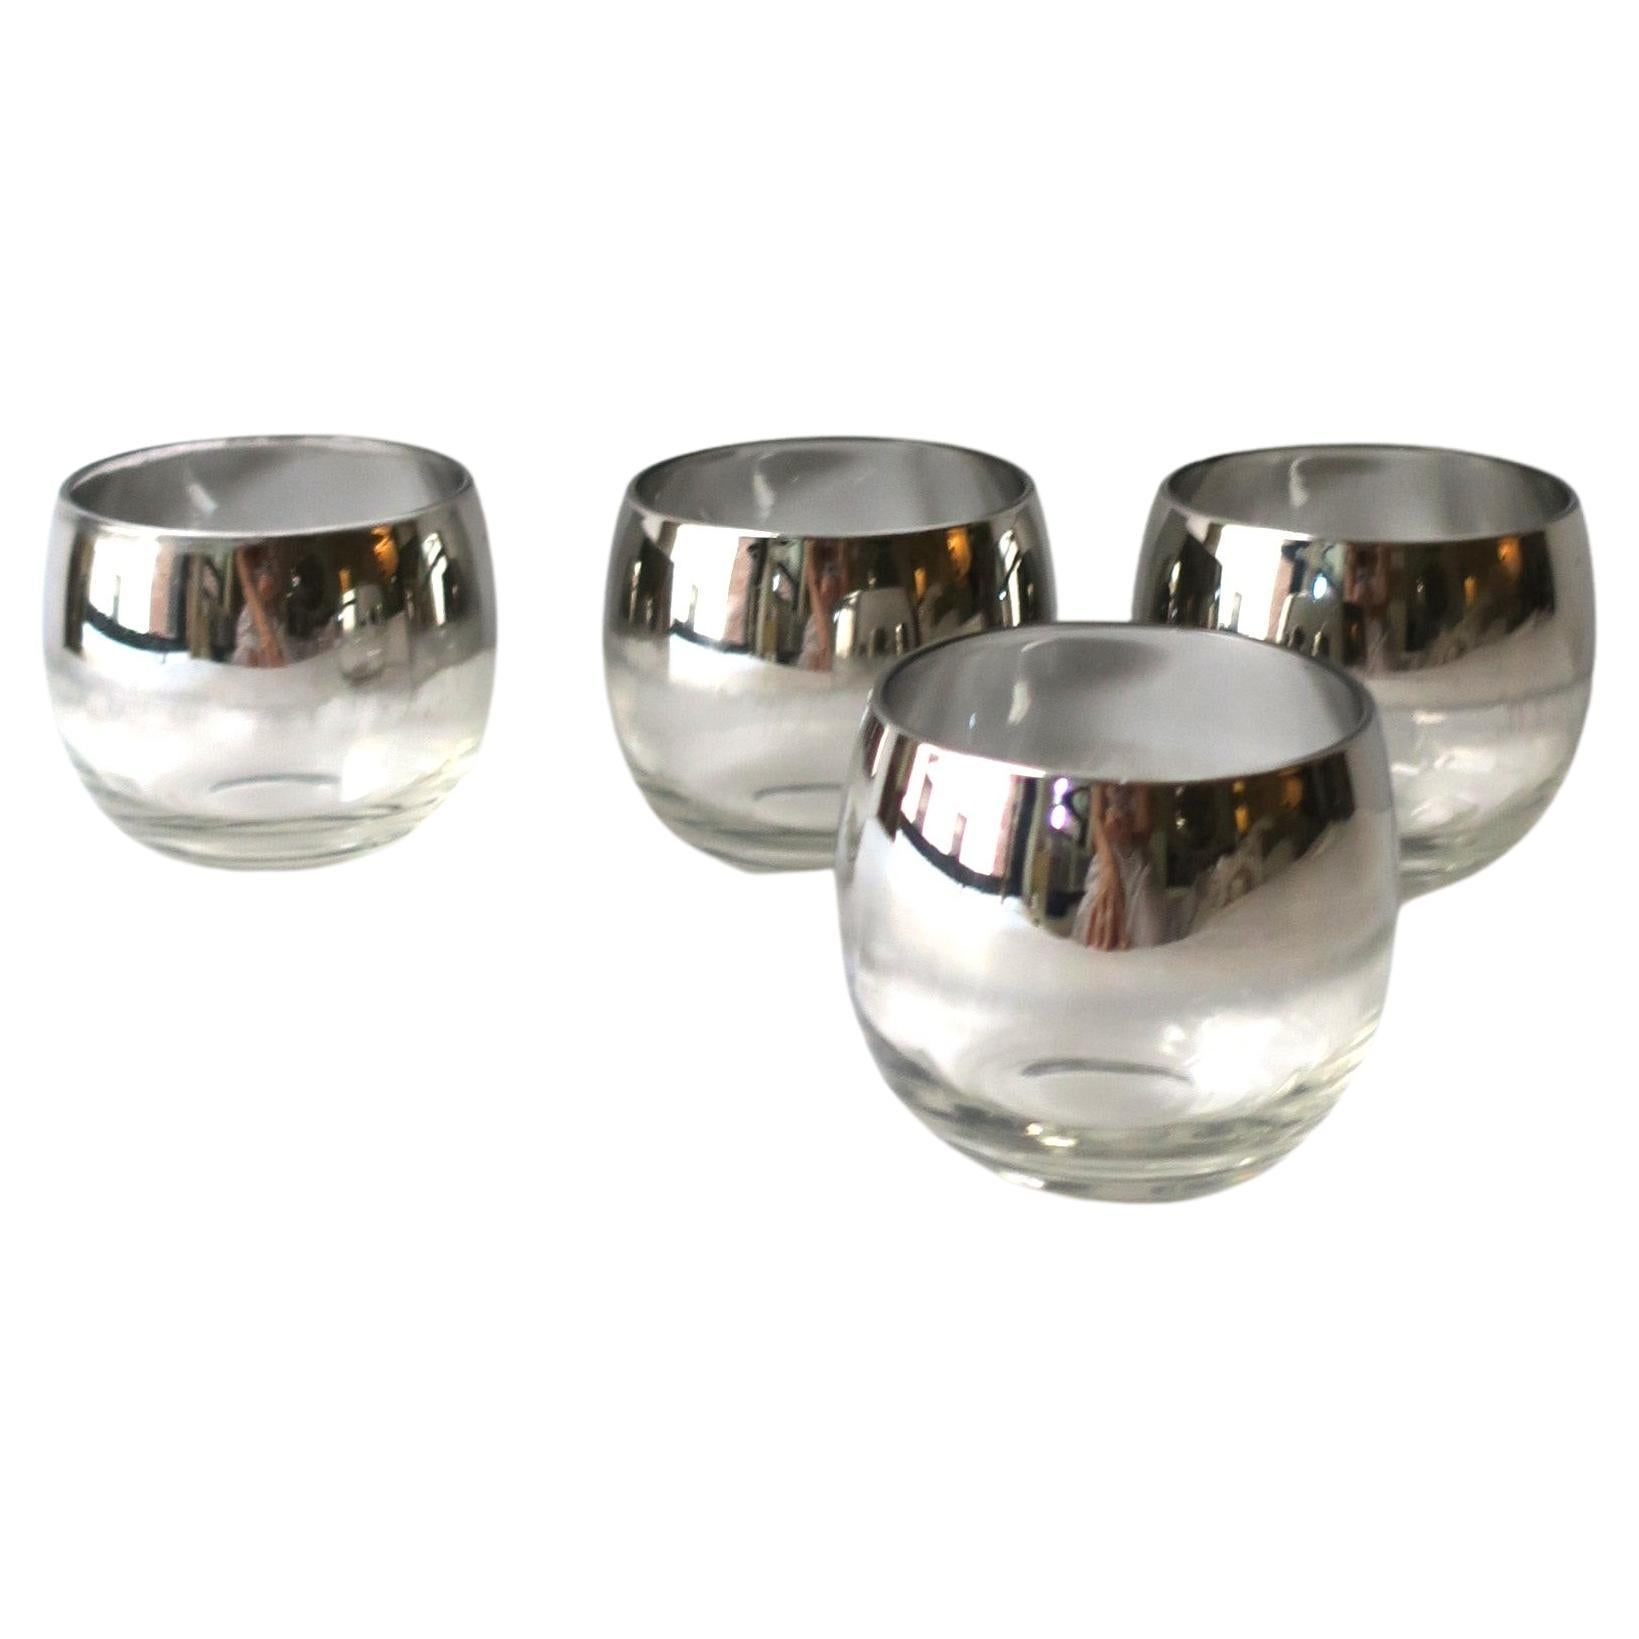 Midcentury Modern Cocktail Glasses Lowball Roly Poly, Set of 4 For Sale